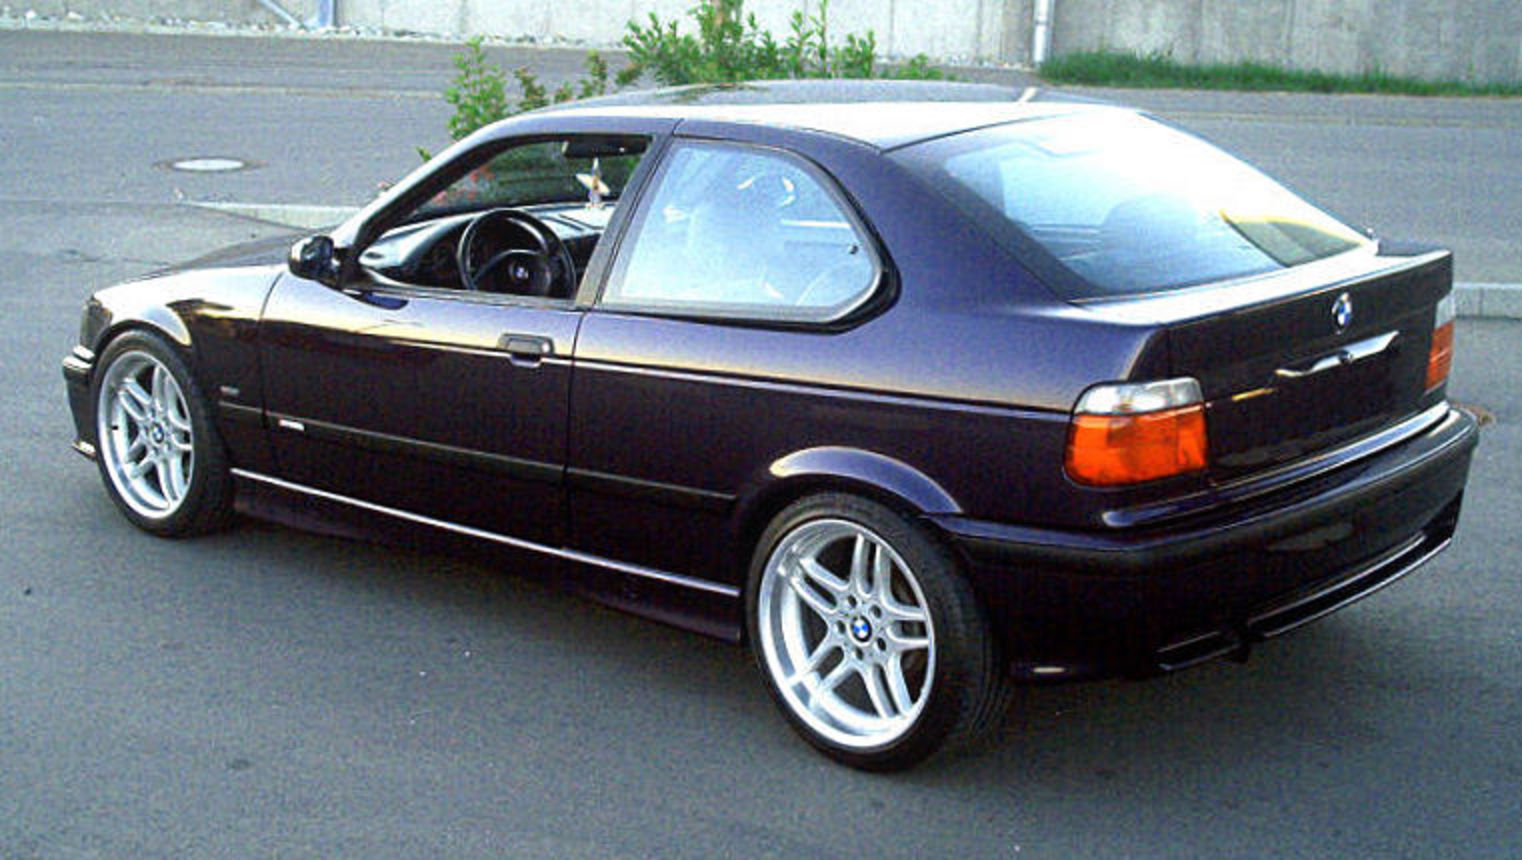 List of options and versions by Bmw 318. Bmw 318, Bmw 318 td, Bmw ...